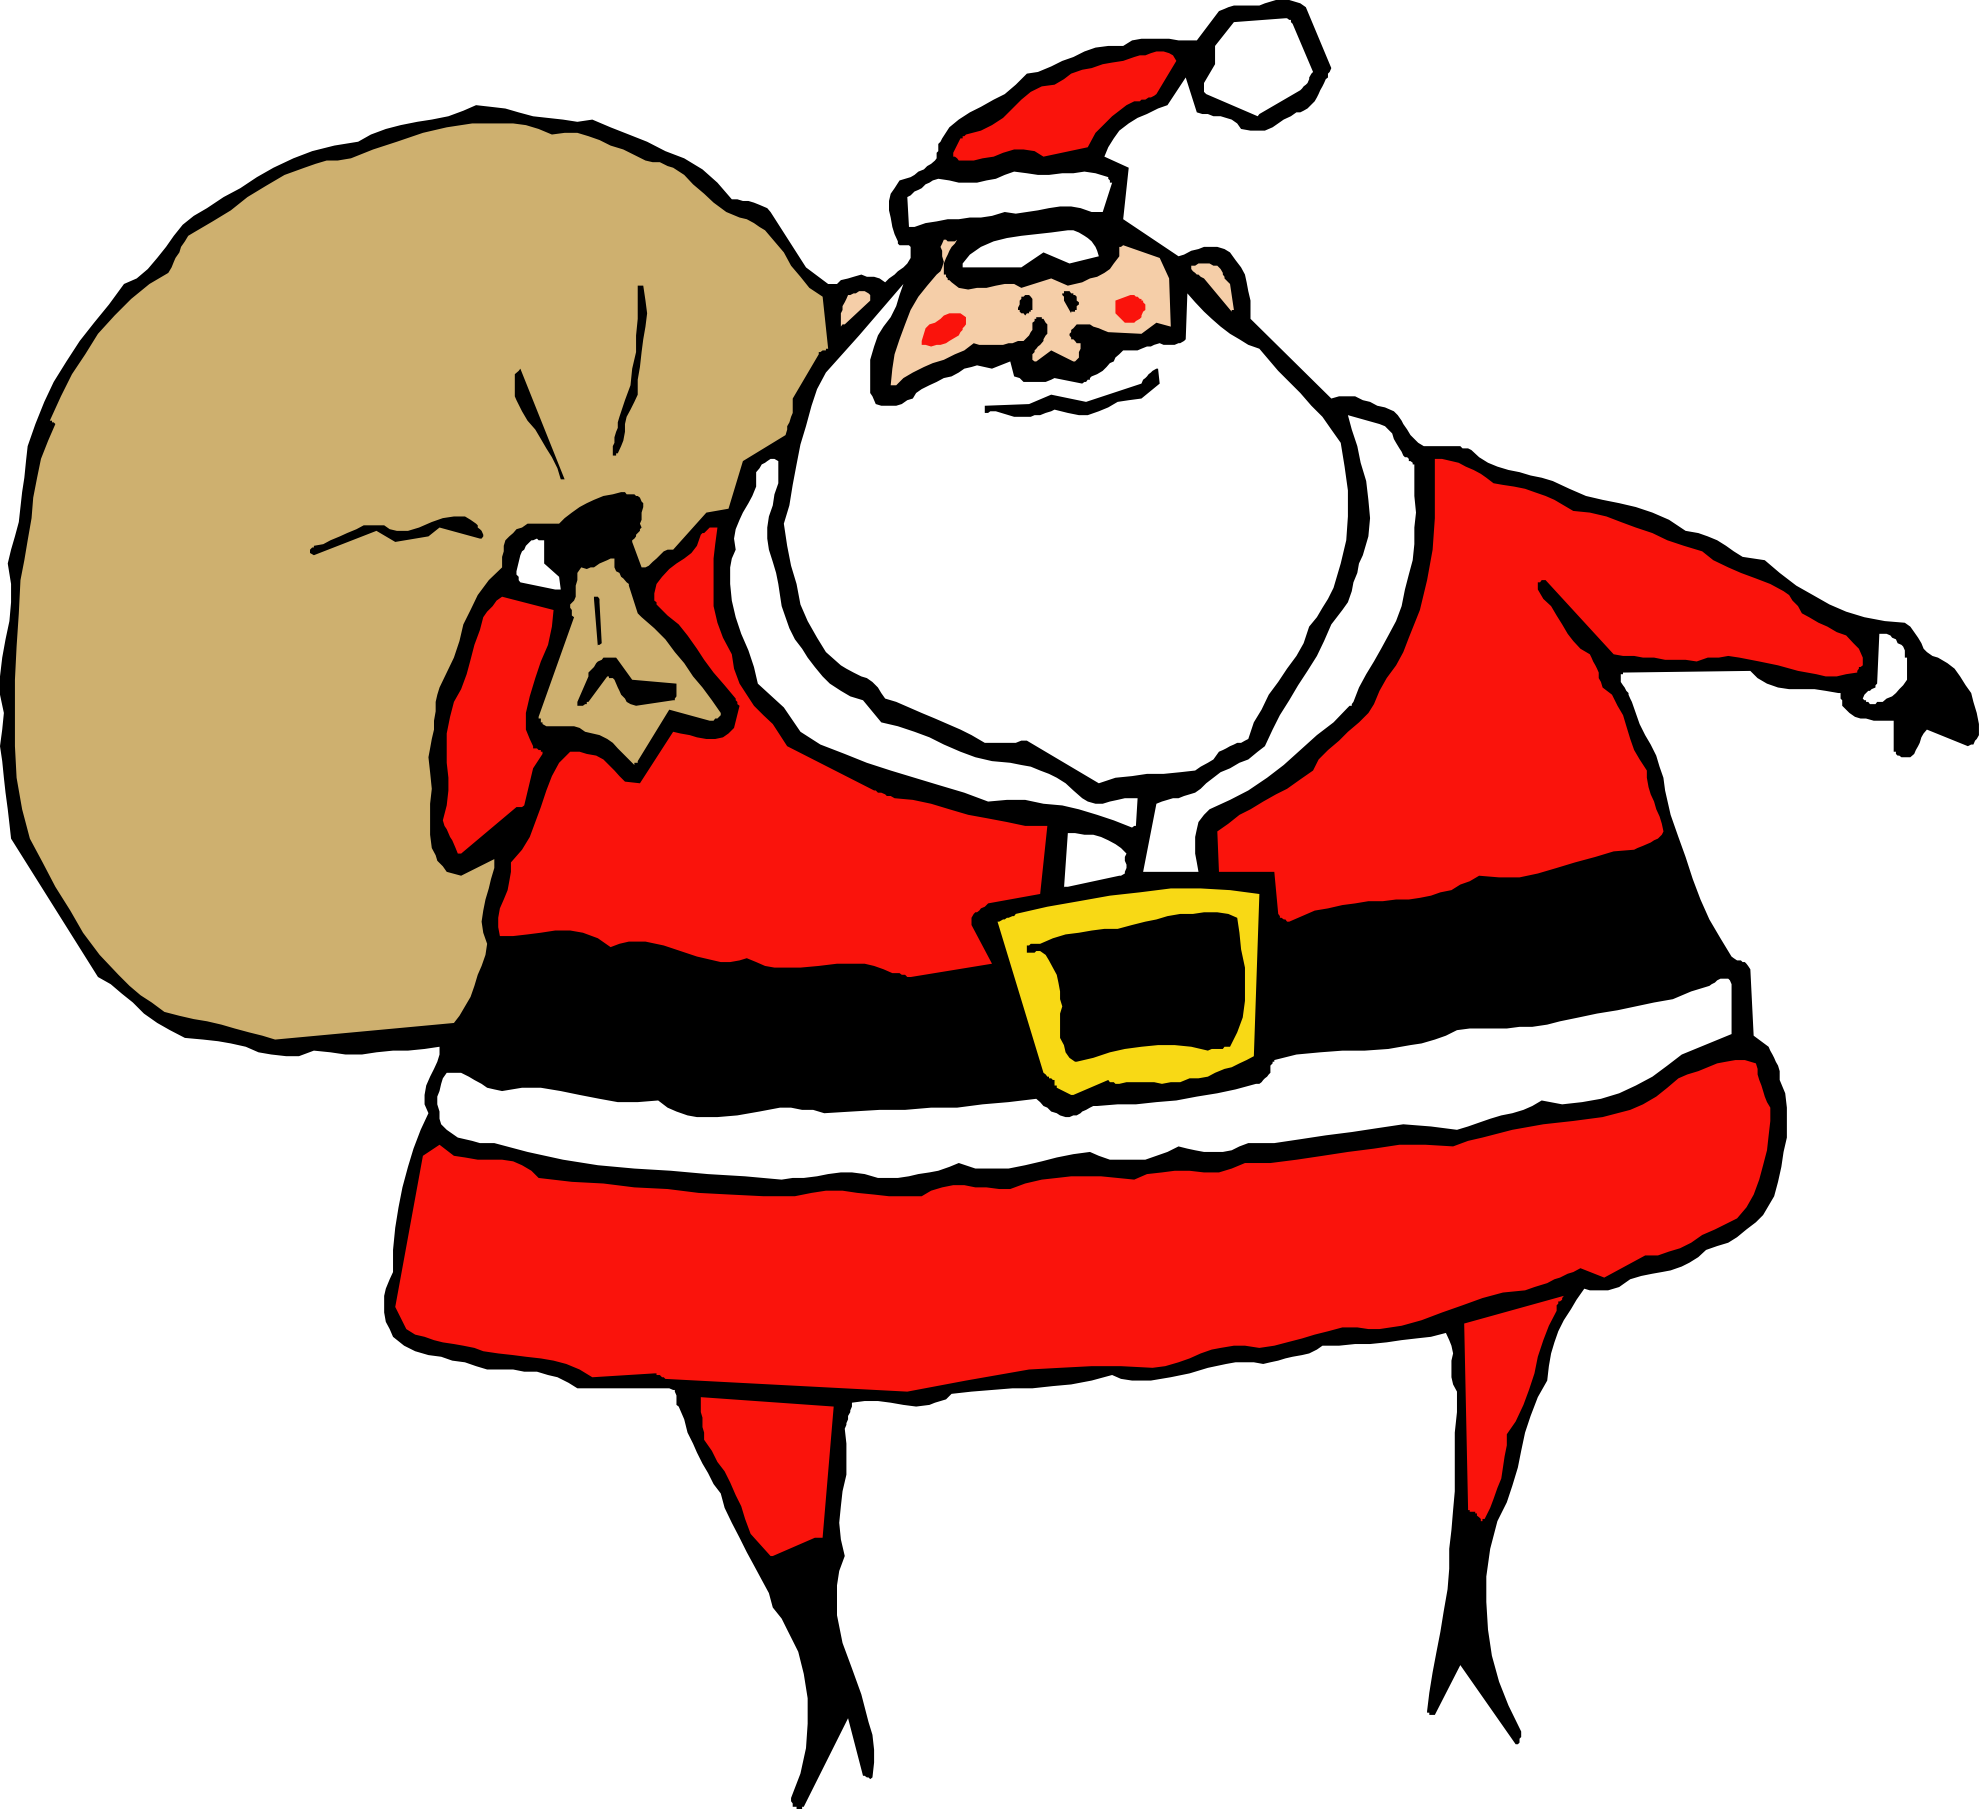 Xmas Stuff For > Christmas Images Clip Art